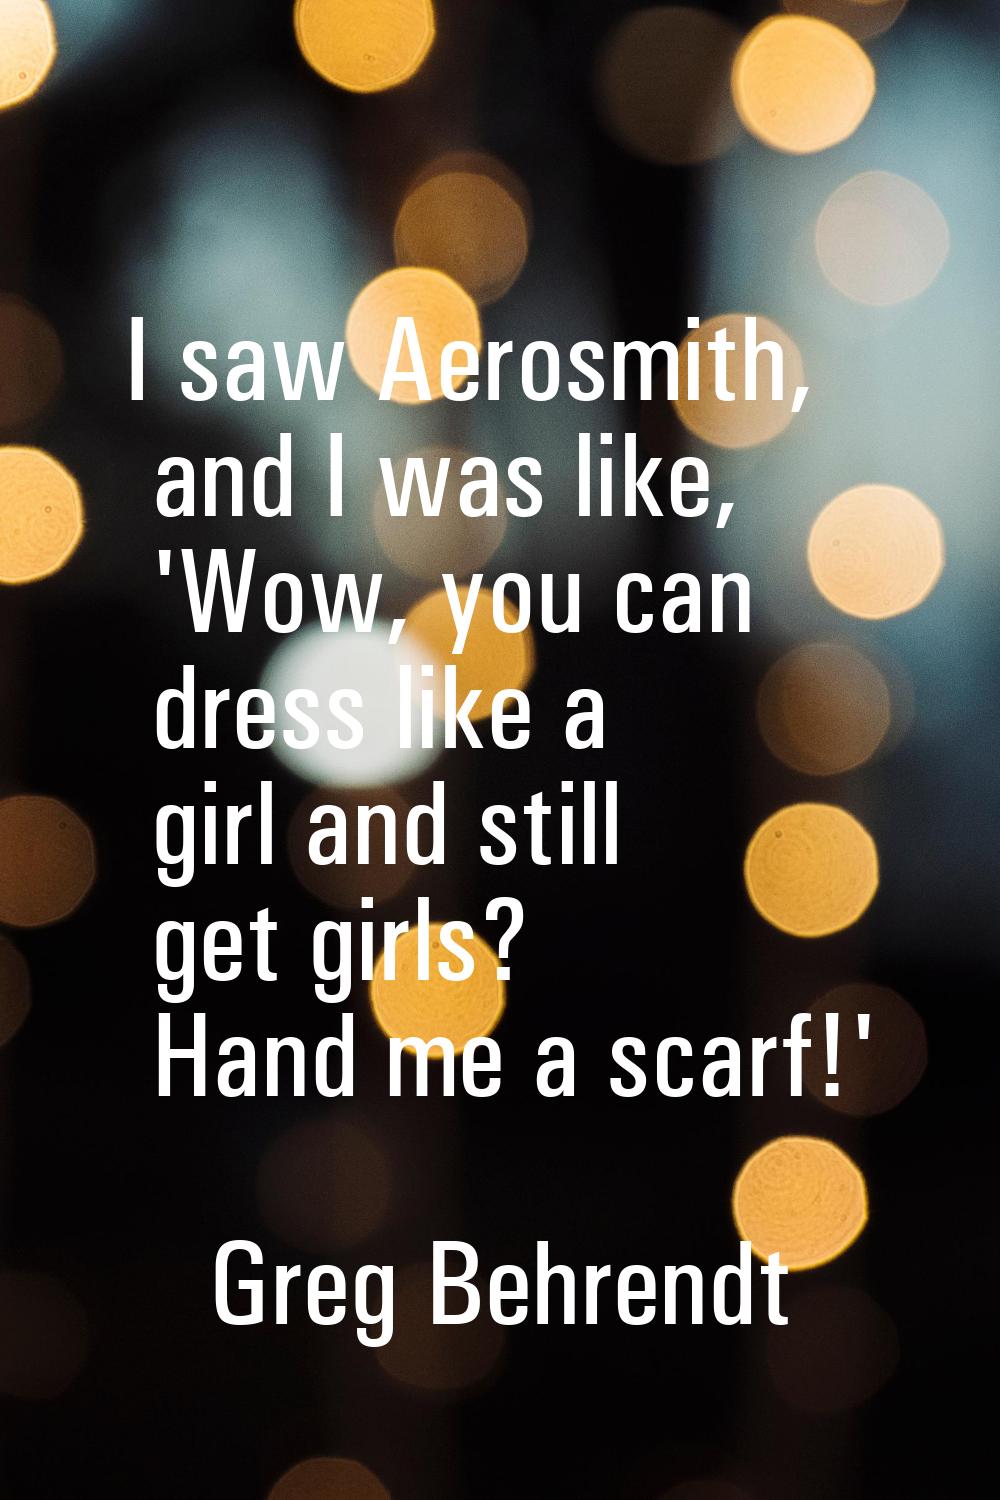 I saw Aerosmith, and I was like, 'Wow, you can dress like a girl and still get girls? Hand me a sca